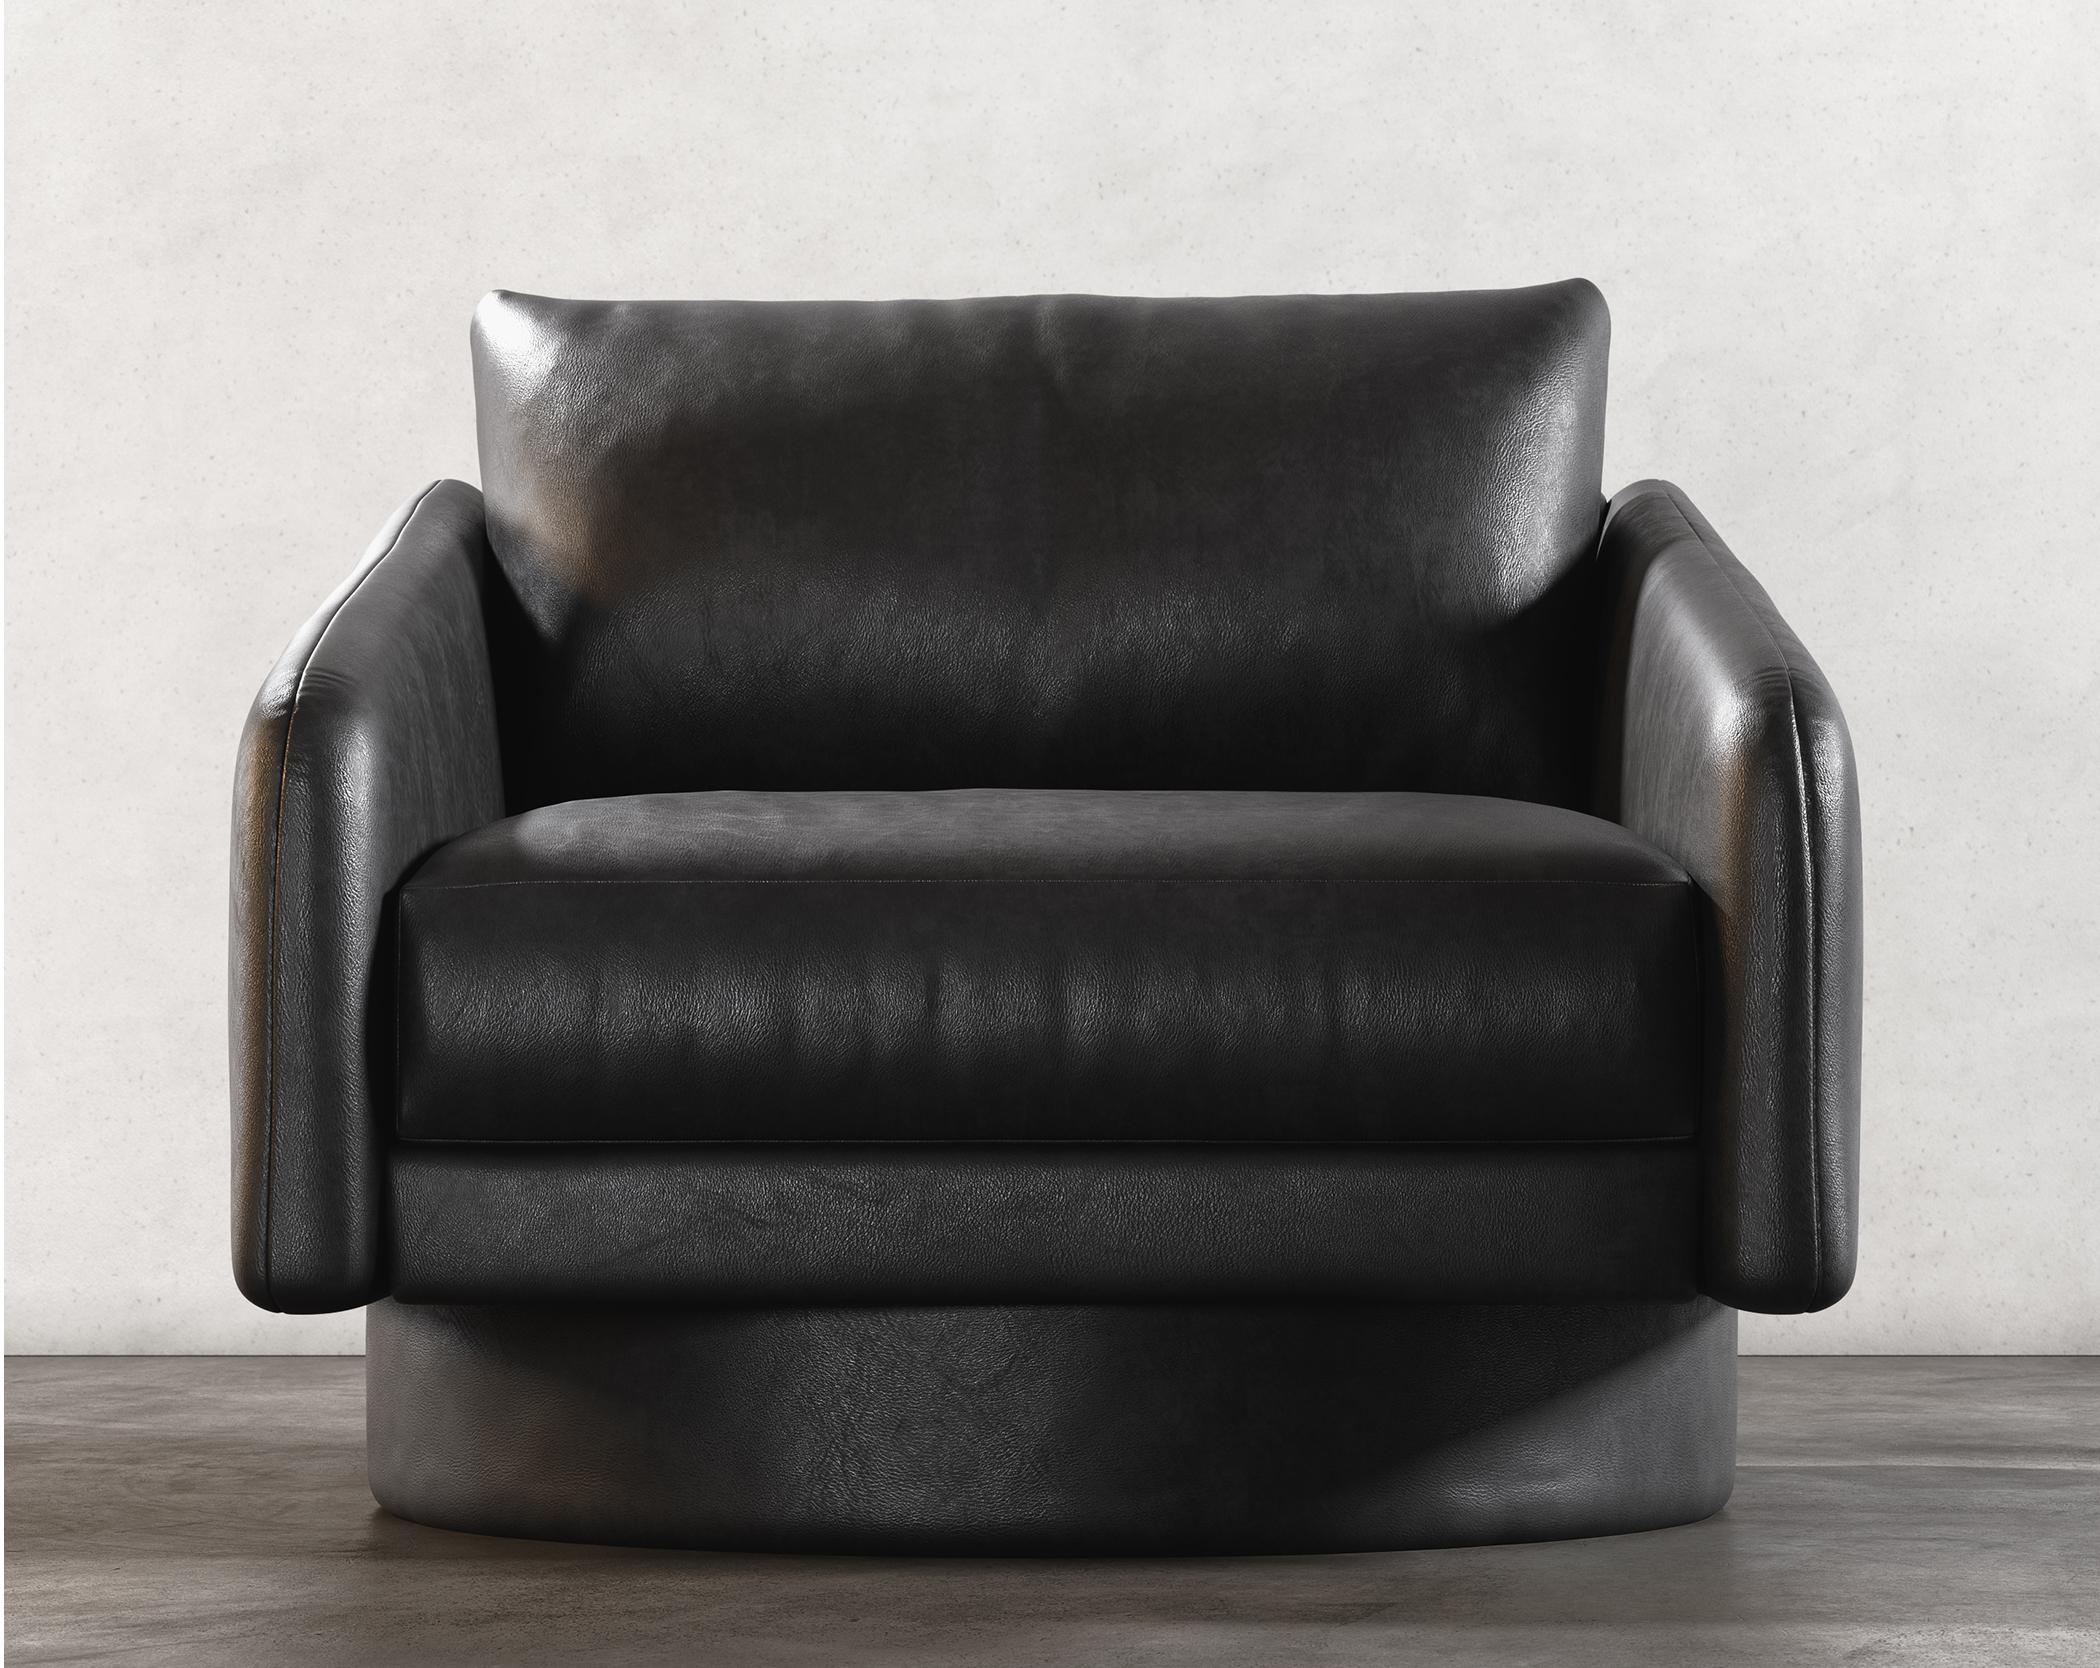 American SURGE LOUNGE CHAIR - Modern Design in Faux Lambskin Black For Sale